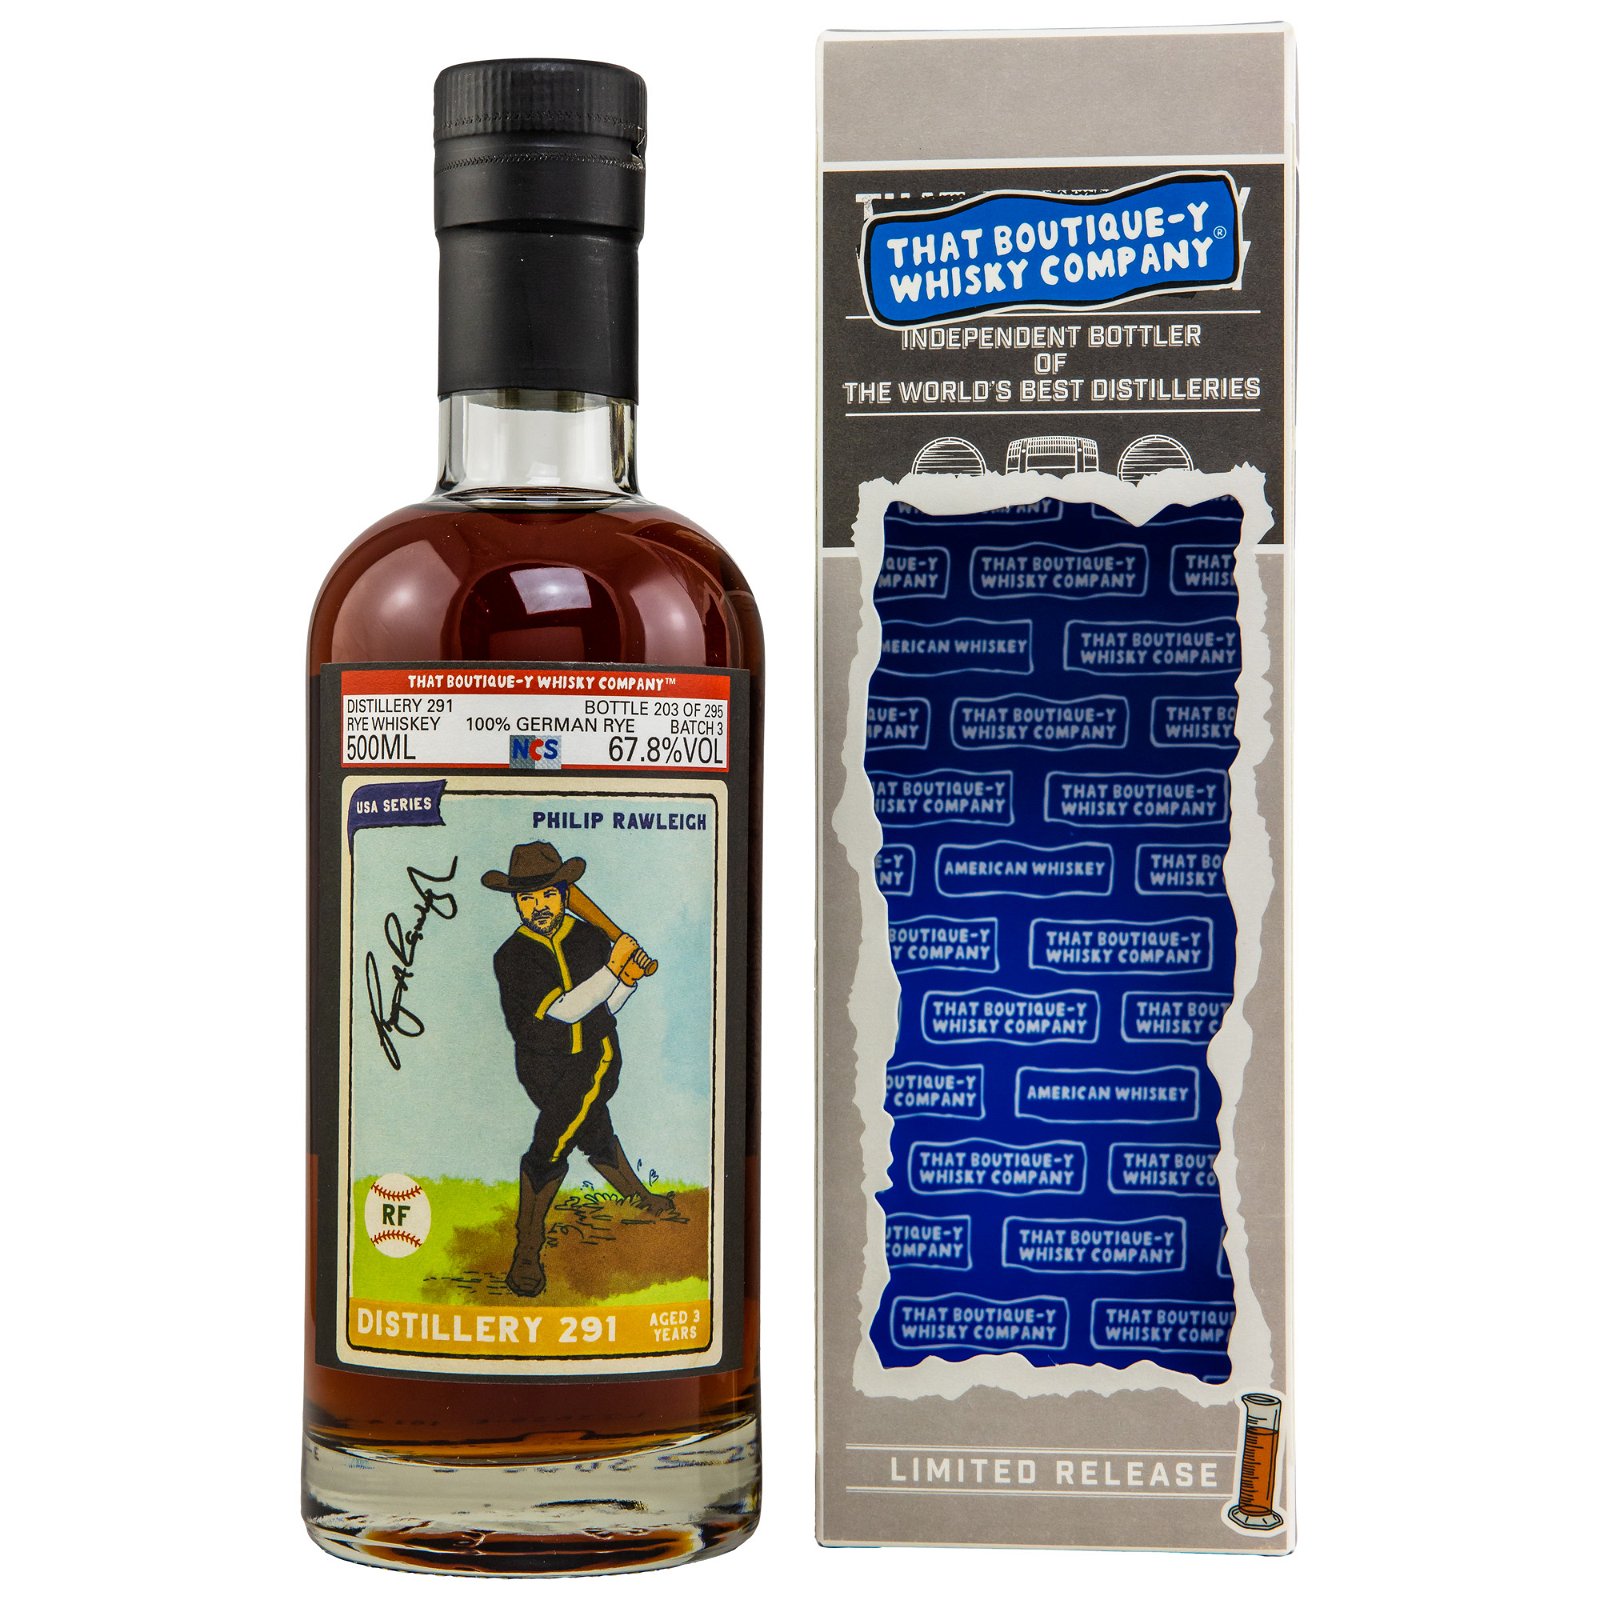 Distillery 291 - 3 Jahre Batch 3 (That Boutique-y Whisky Company)